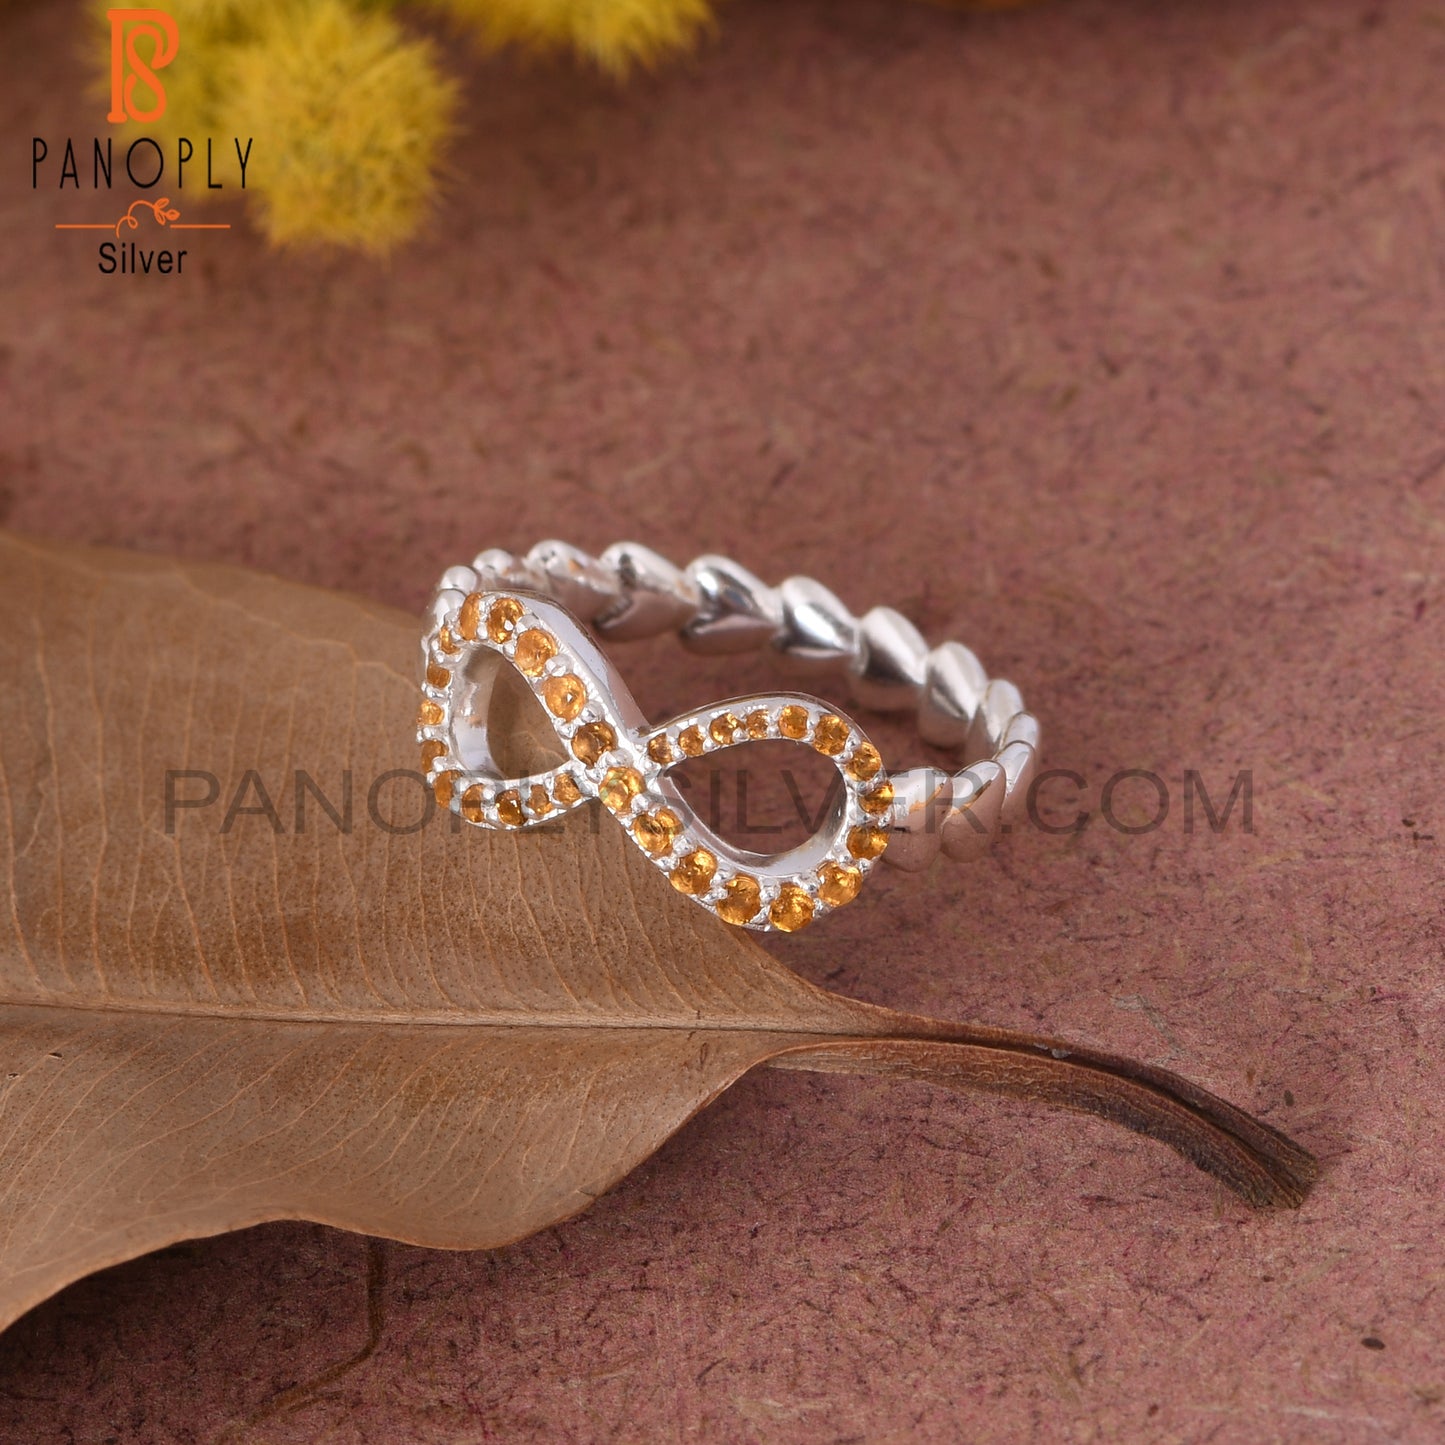 Silver Infinity Ring in 925 Quality Silver Heart Band Rings